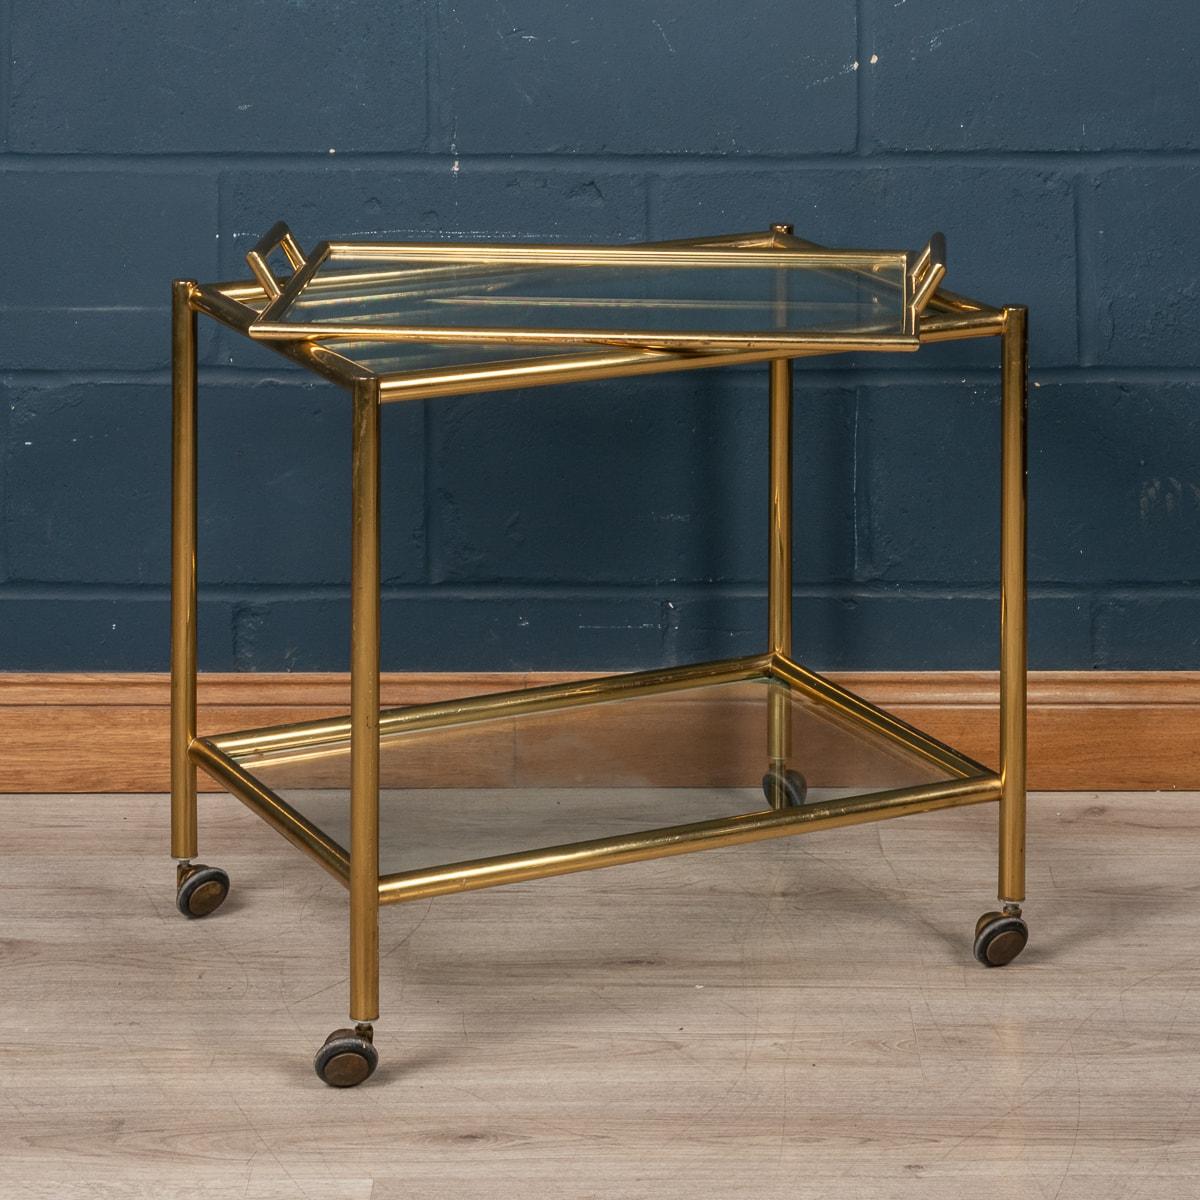 A mid to late 20th century brass effect two tier drinks trolley having a circular brass frame with removable glass tray top. This contemporary designer drinks or cocktail trolley was made in Italy in the second half of the last century and has an